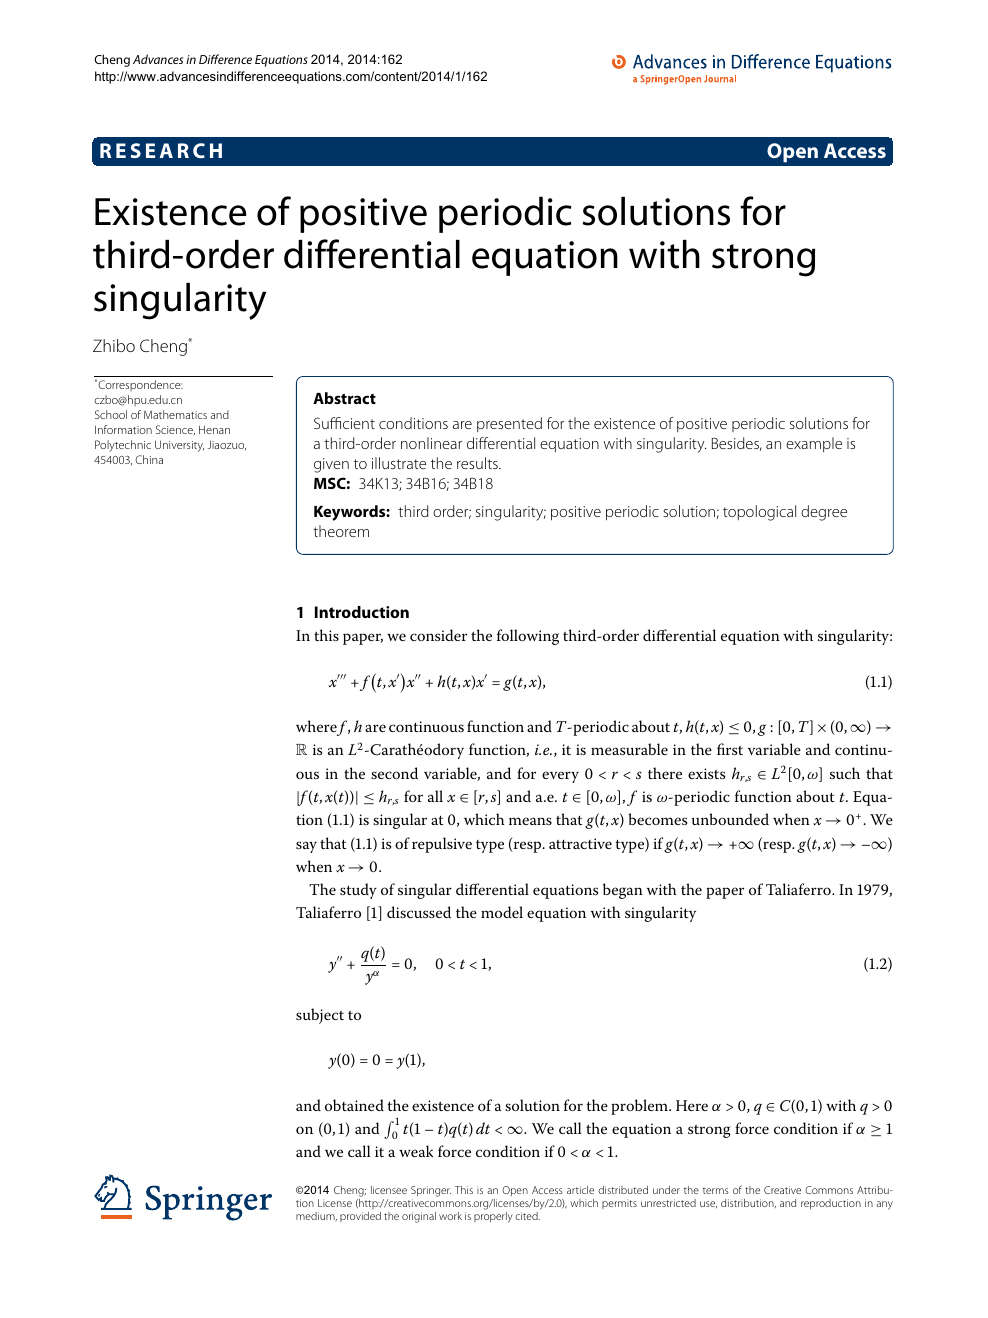 Existence Of Positive Periodic Solutions For Third Order Differential Equation With Strong Singularity Topic Of Research Paper In Mathematics Download Scholarly Article Pdf And Read For Free On Cyberleninka Open Science Hub